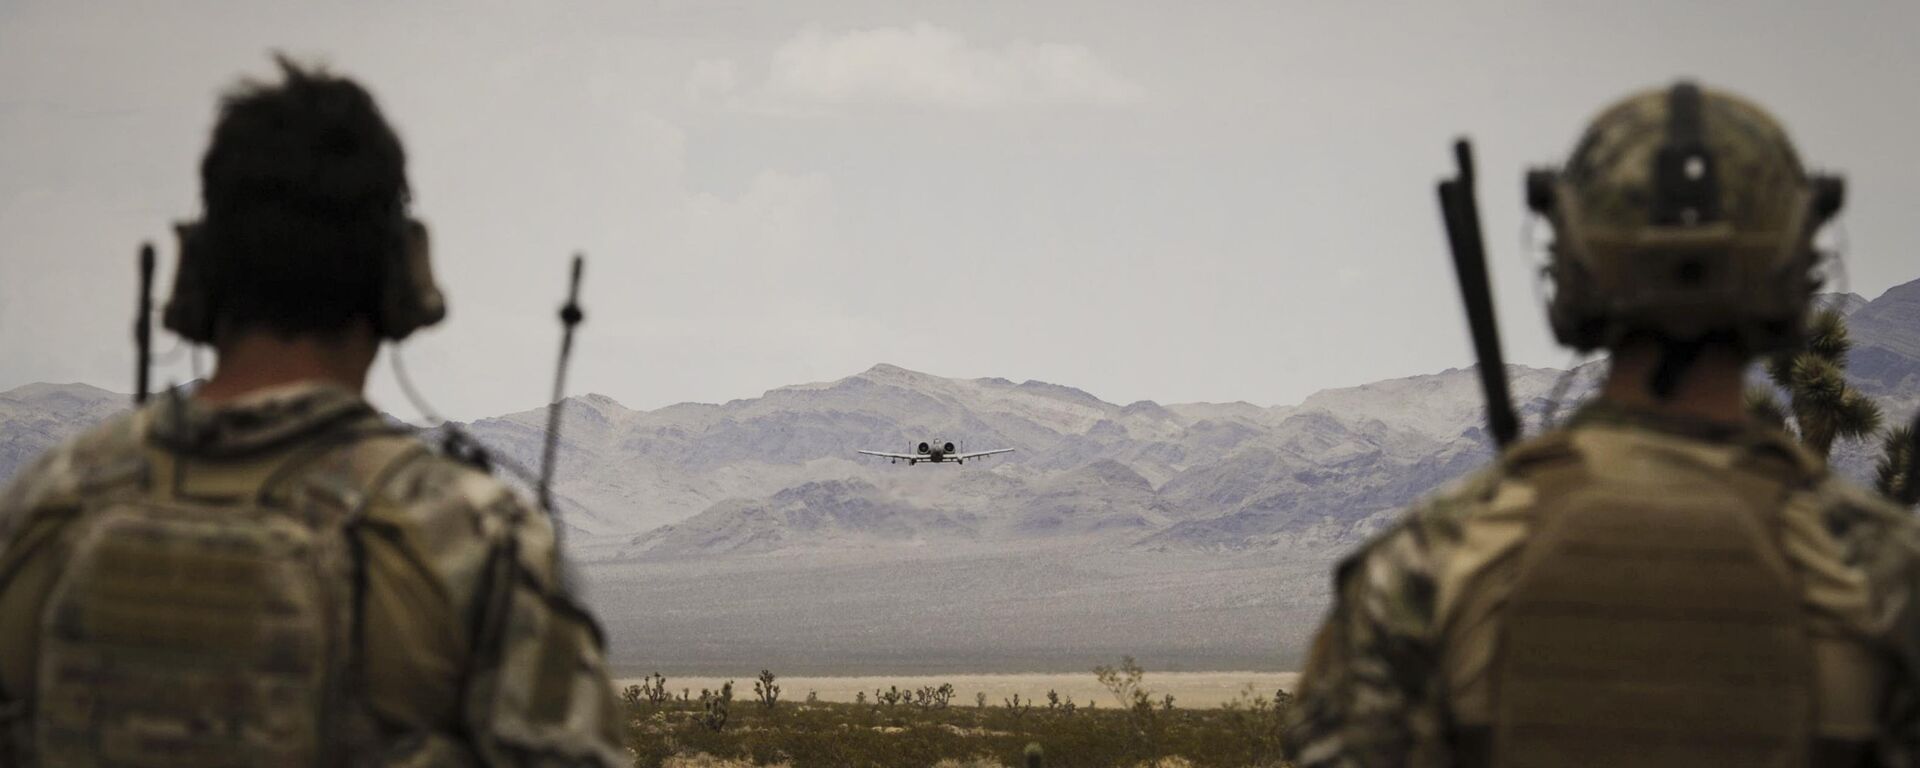 Airmen watch an A-10 Thunderbolt II perform a show-of-force maneuver during a training exercise at the Nevada Test and Training Range at Nellis Air Force Base, Nev., July 19, 2017 - Sputnik International, 1920, 02.02.2023